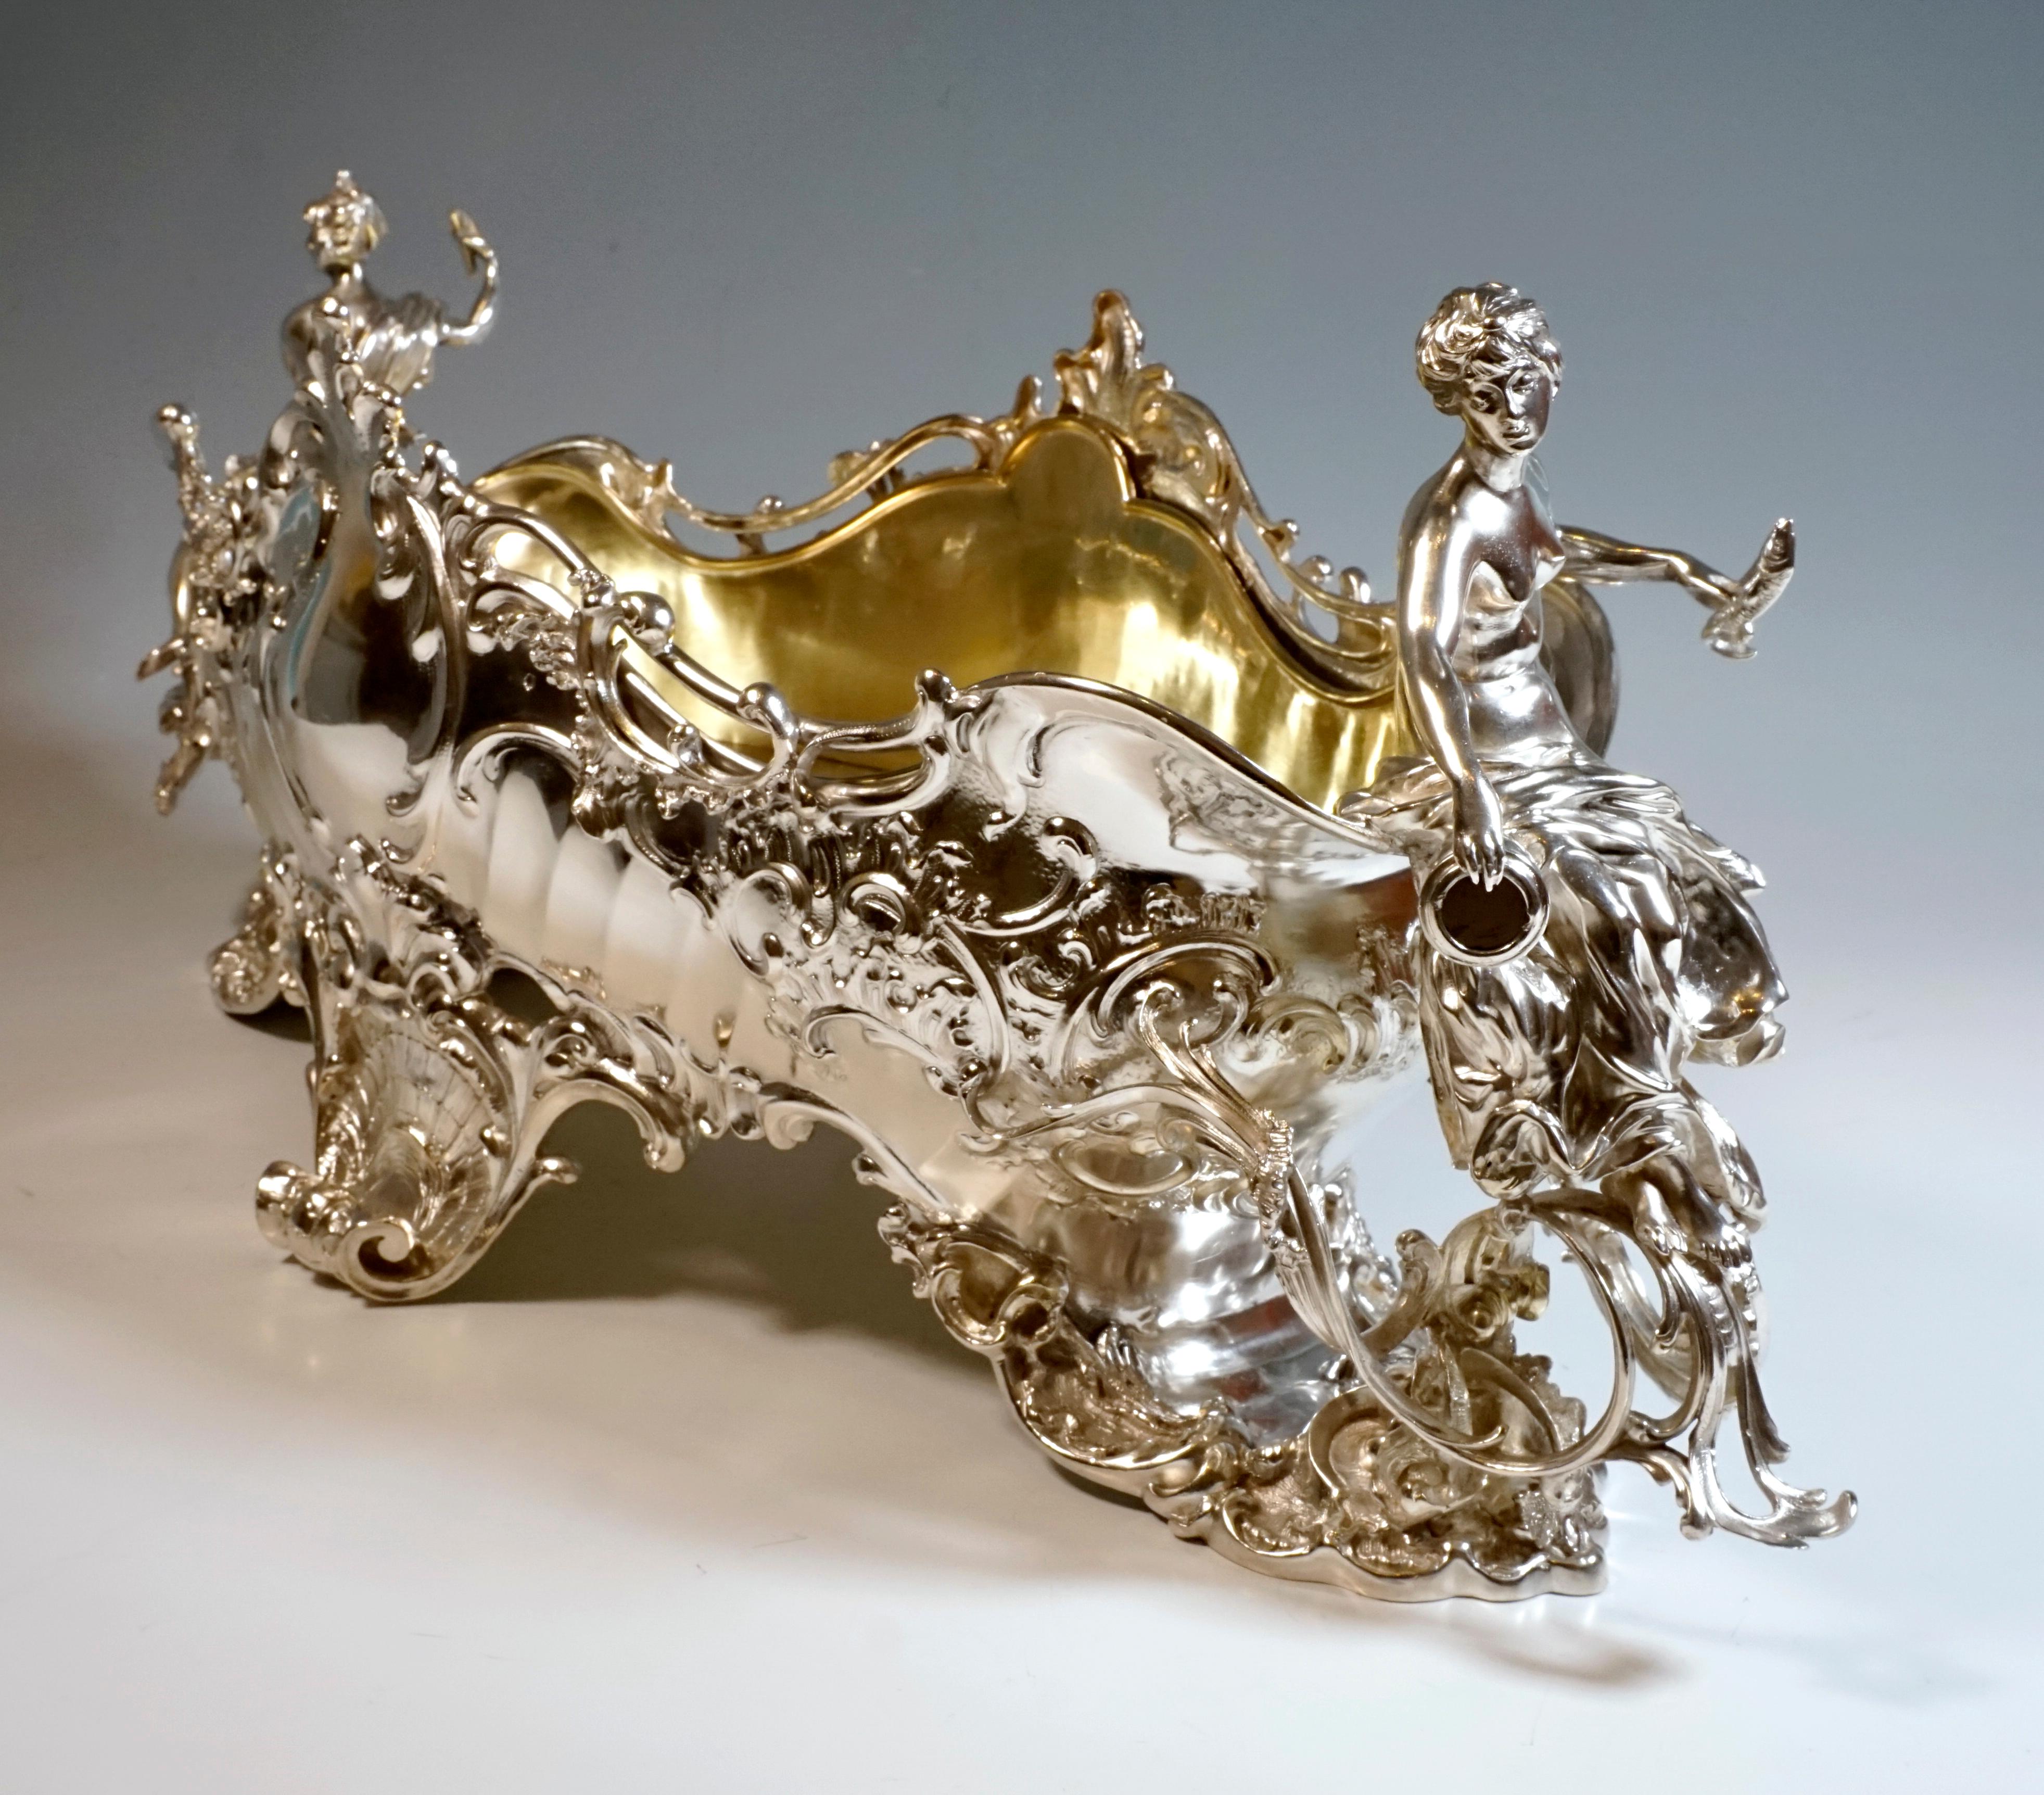 Hand-Crafted Large Viennese Silver Ornate Centerpiece with Nymphs by Brüder Frank, circa 1890